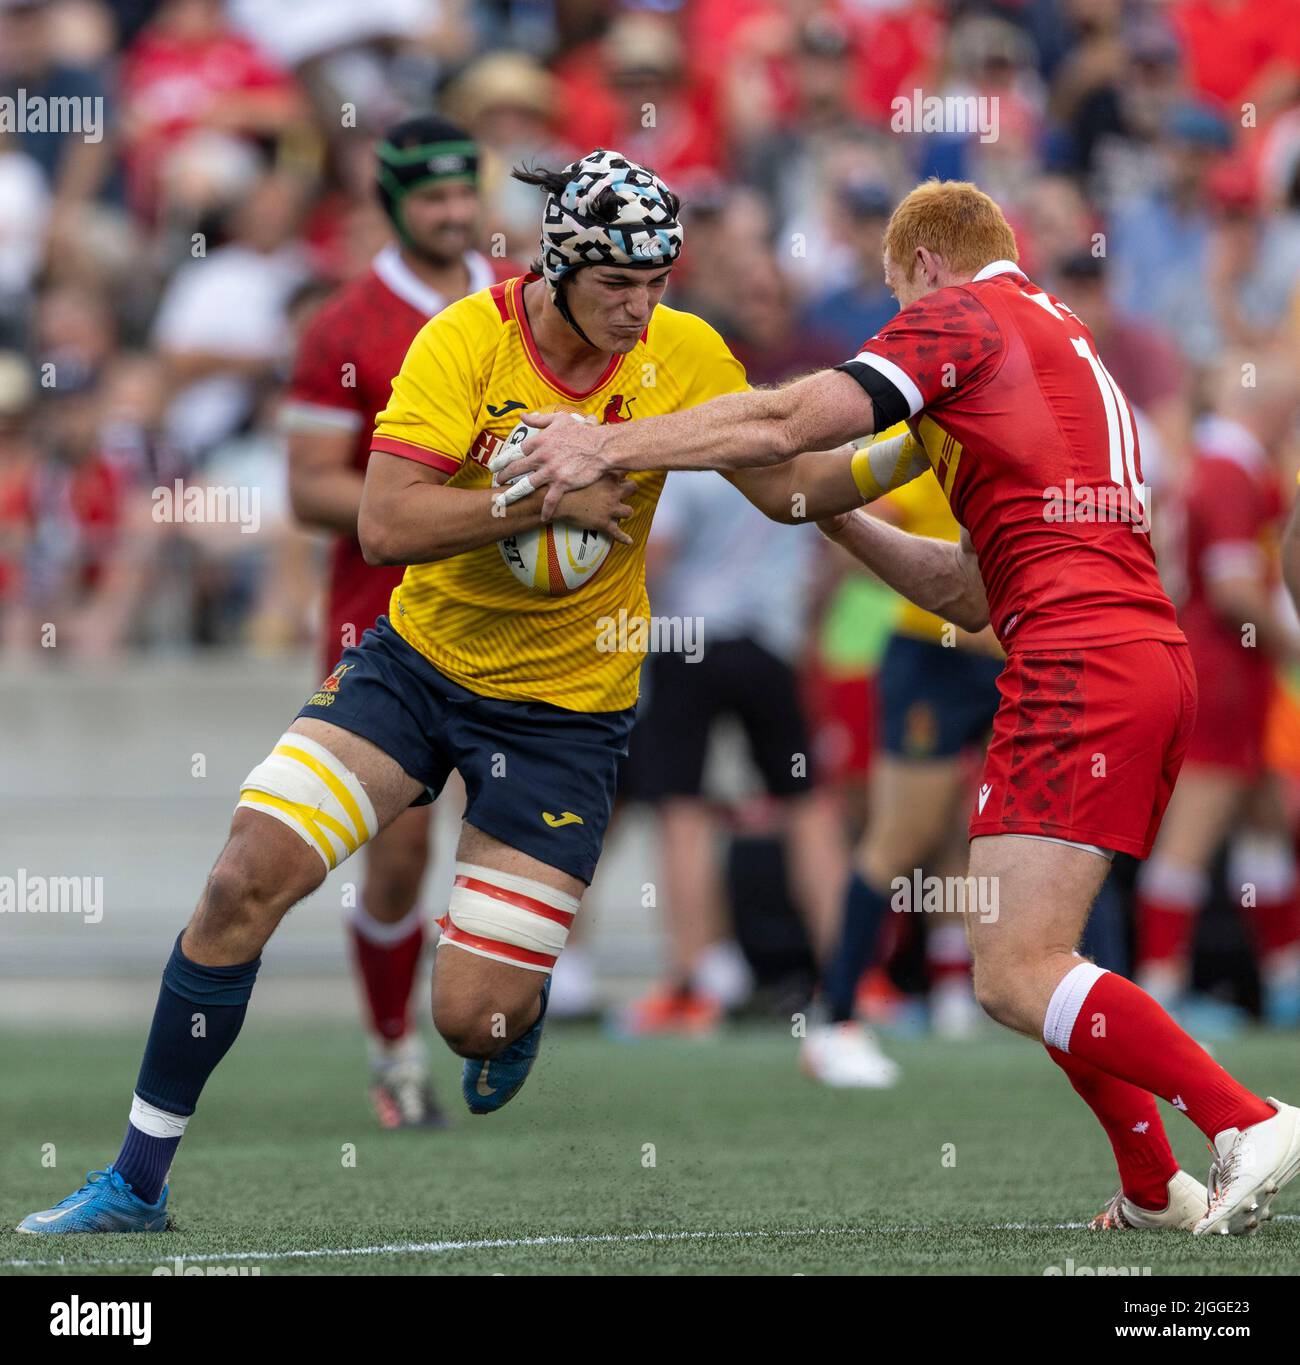 Ottawa, Canada. 10 Jul 2022. IGNACIO PINEIRO (20) of Spain in the Spain at Canada Men’s World Rugby match played at TD Place Stadium in Ottawa, Canada. Spain won the game 57-34.. Credit: Sean Burges/Alamy Live News Stock Photo